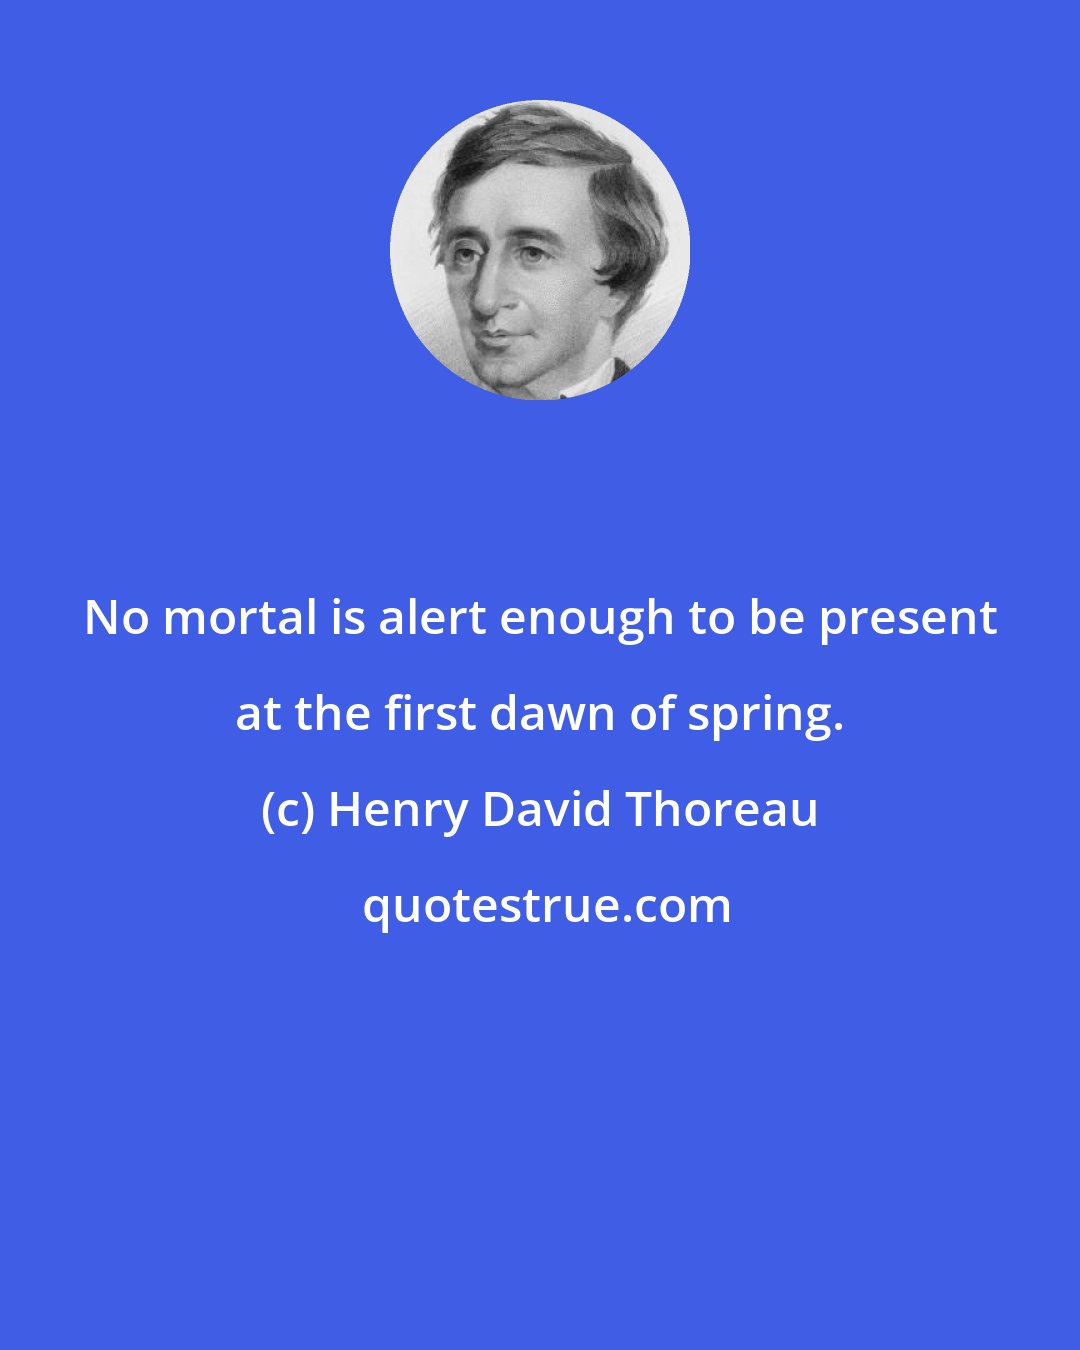 Henry David Thoreau: No mortal is alert enough to be present at the first dawn of spring.